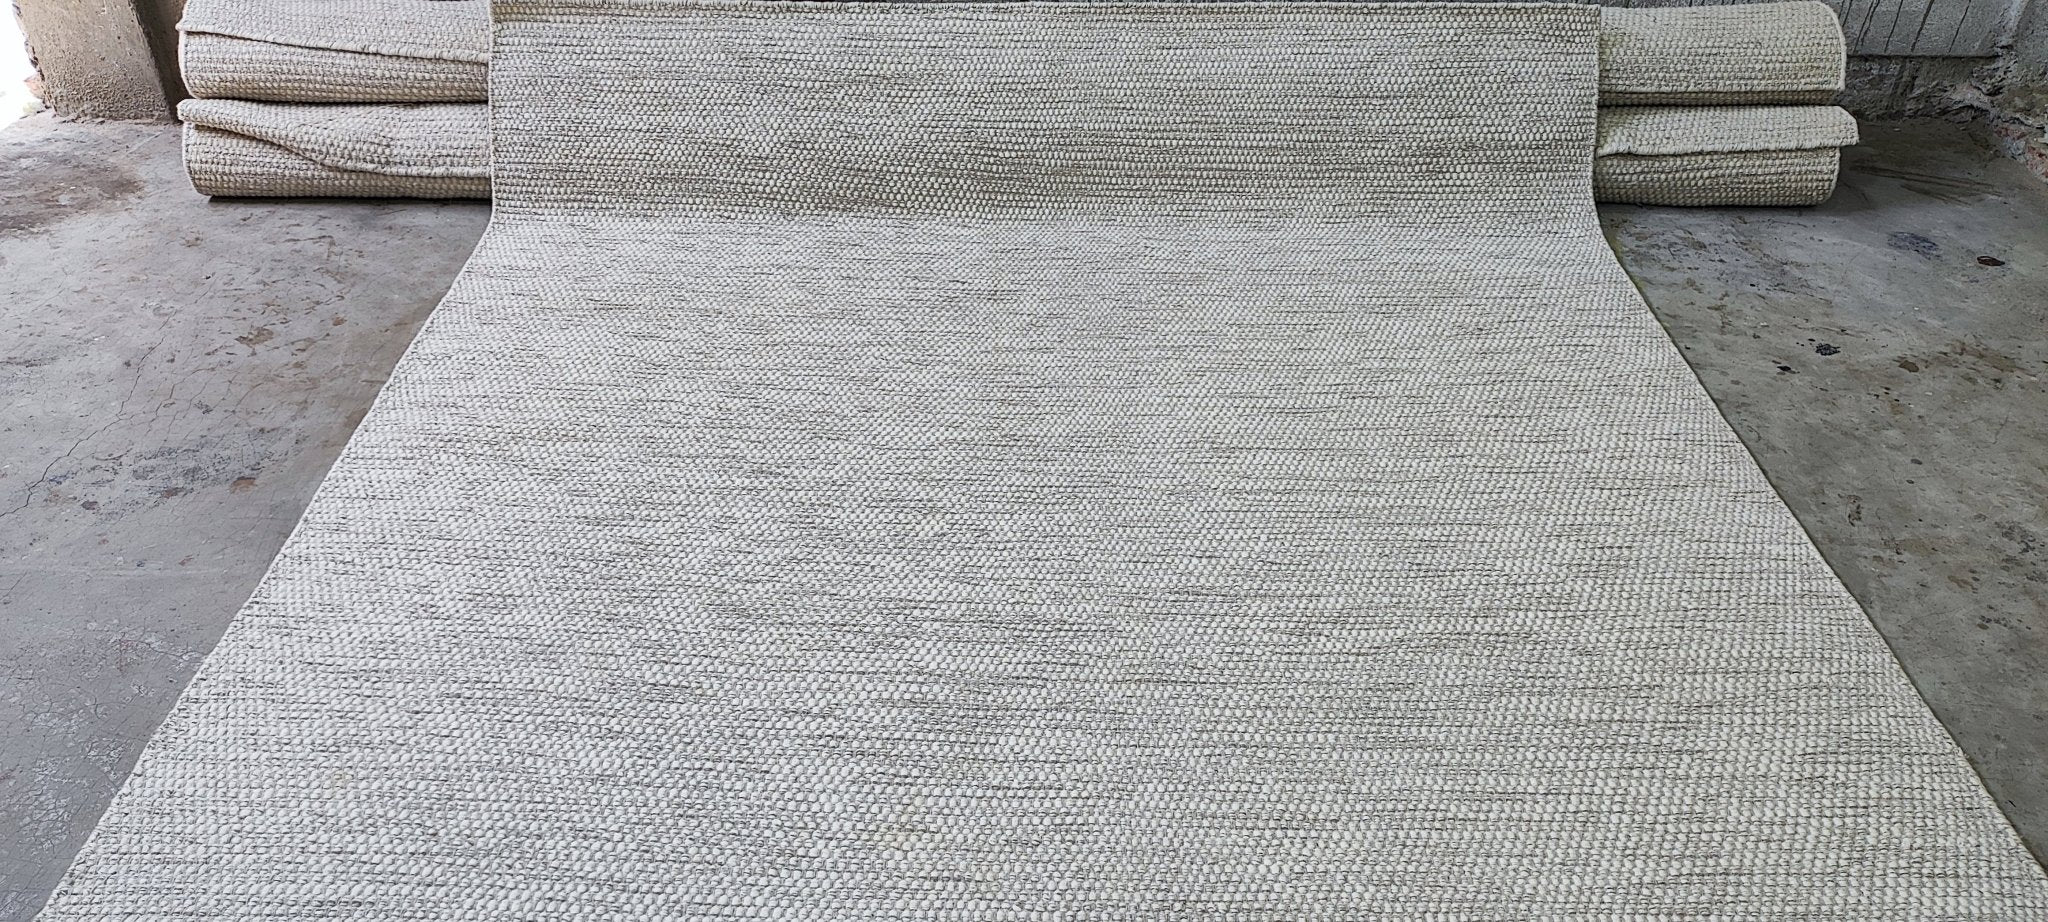 Leo Handwoven Natural Textured Durrie (Multiple Sizes) | Banana Manor Rug Factory Outlet